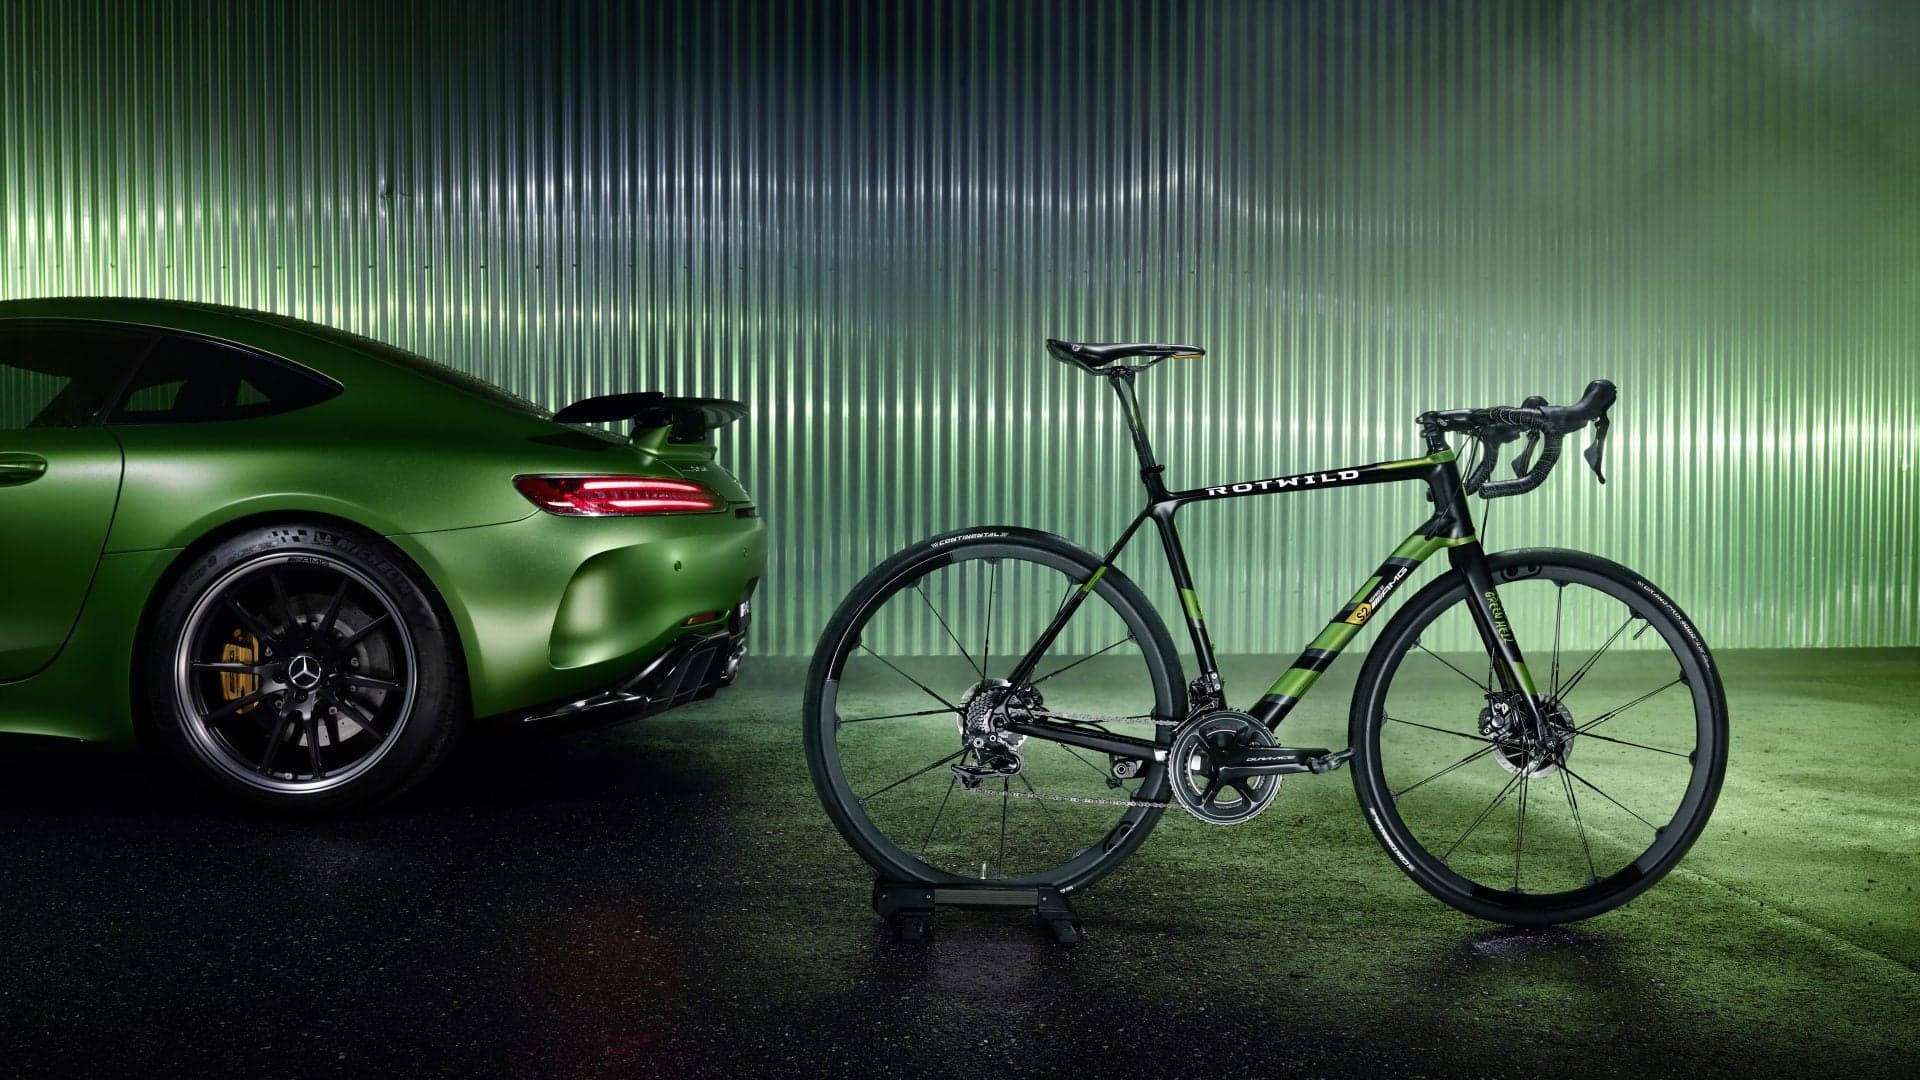 This Rotwild R.S2 Racing Bike Is Inspired by the Mercedes-AMG GT R